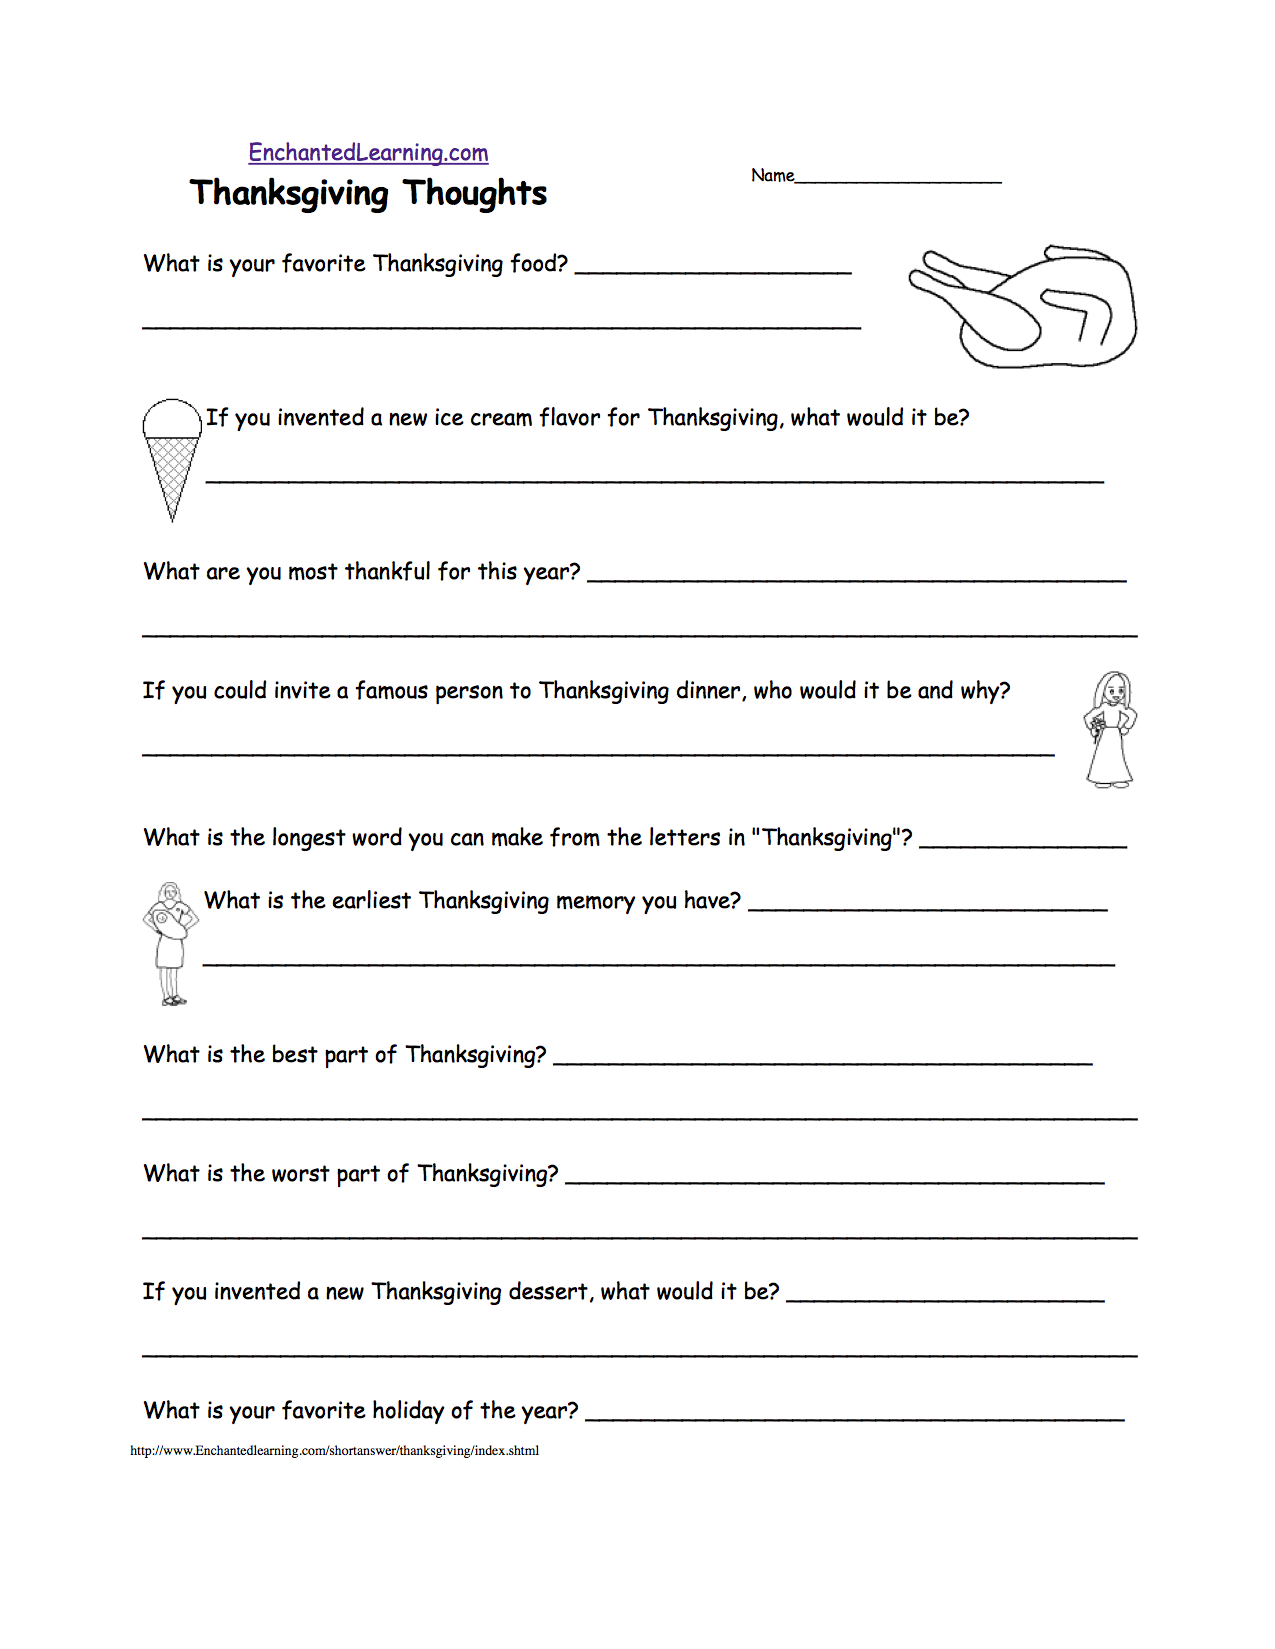 Thanksgiving Crafts, Worksheets, and Activities - EnchantedLearning.com